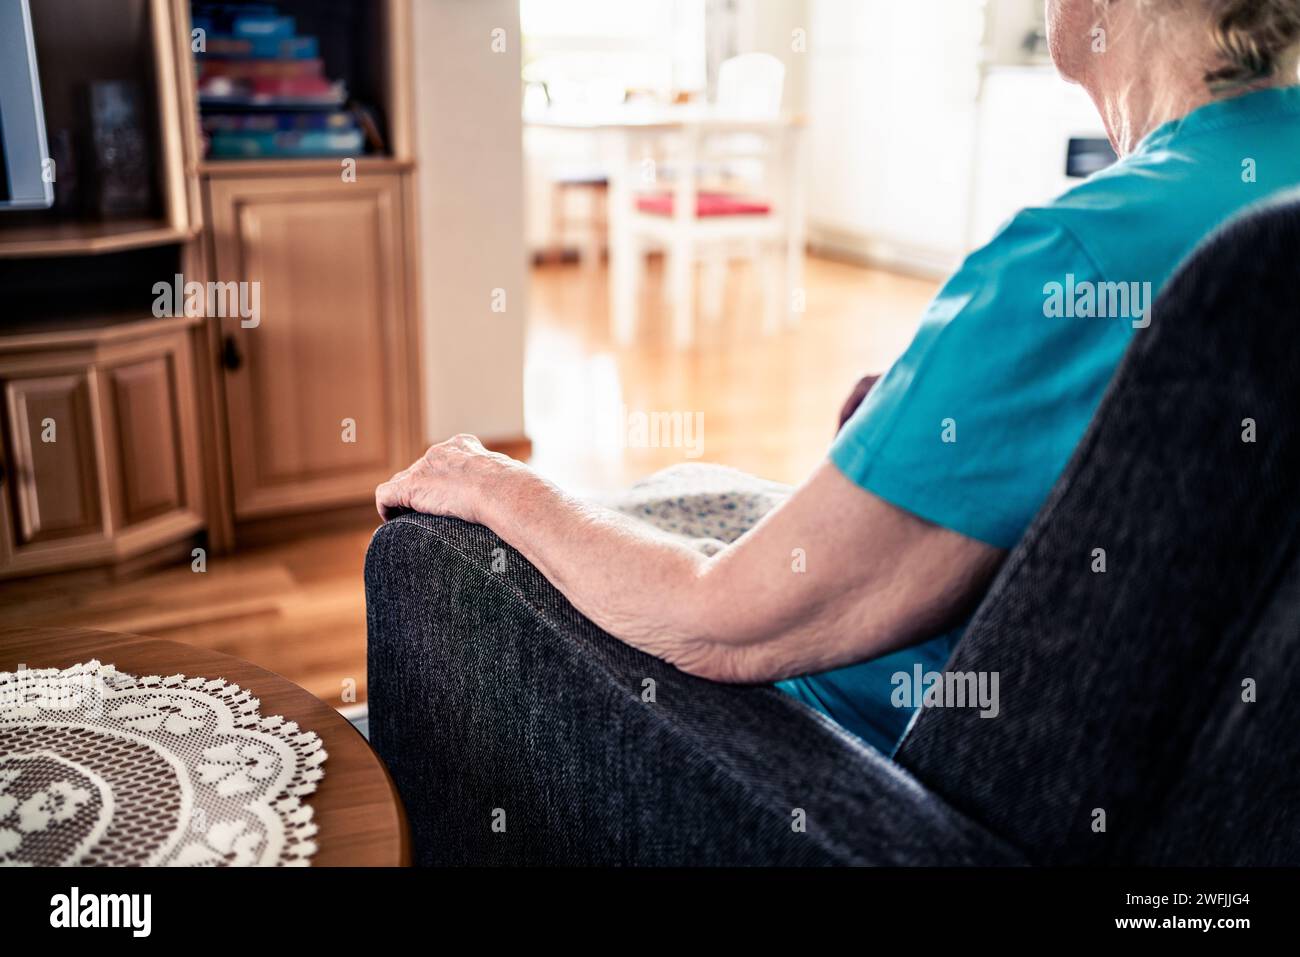 Lonely old senior woman with dementia, alzheimer or anxiety. Loneliness, grief or memory loss of a sad grandma. Home sofa couch. Family stress or sick. Stock Photo